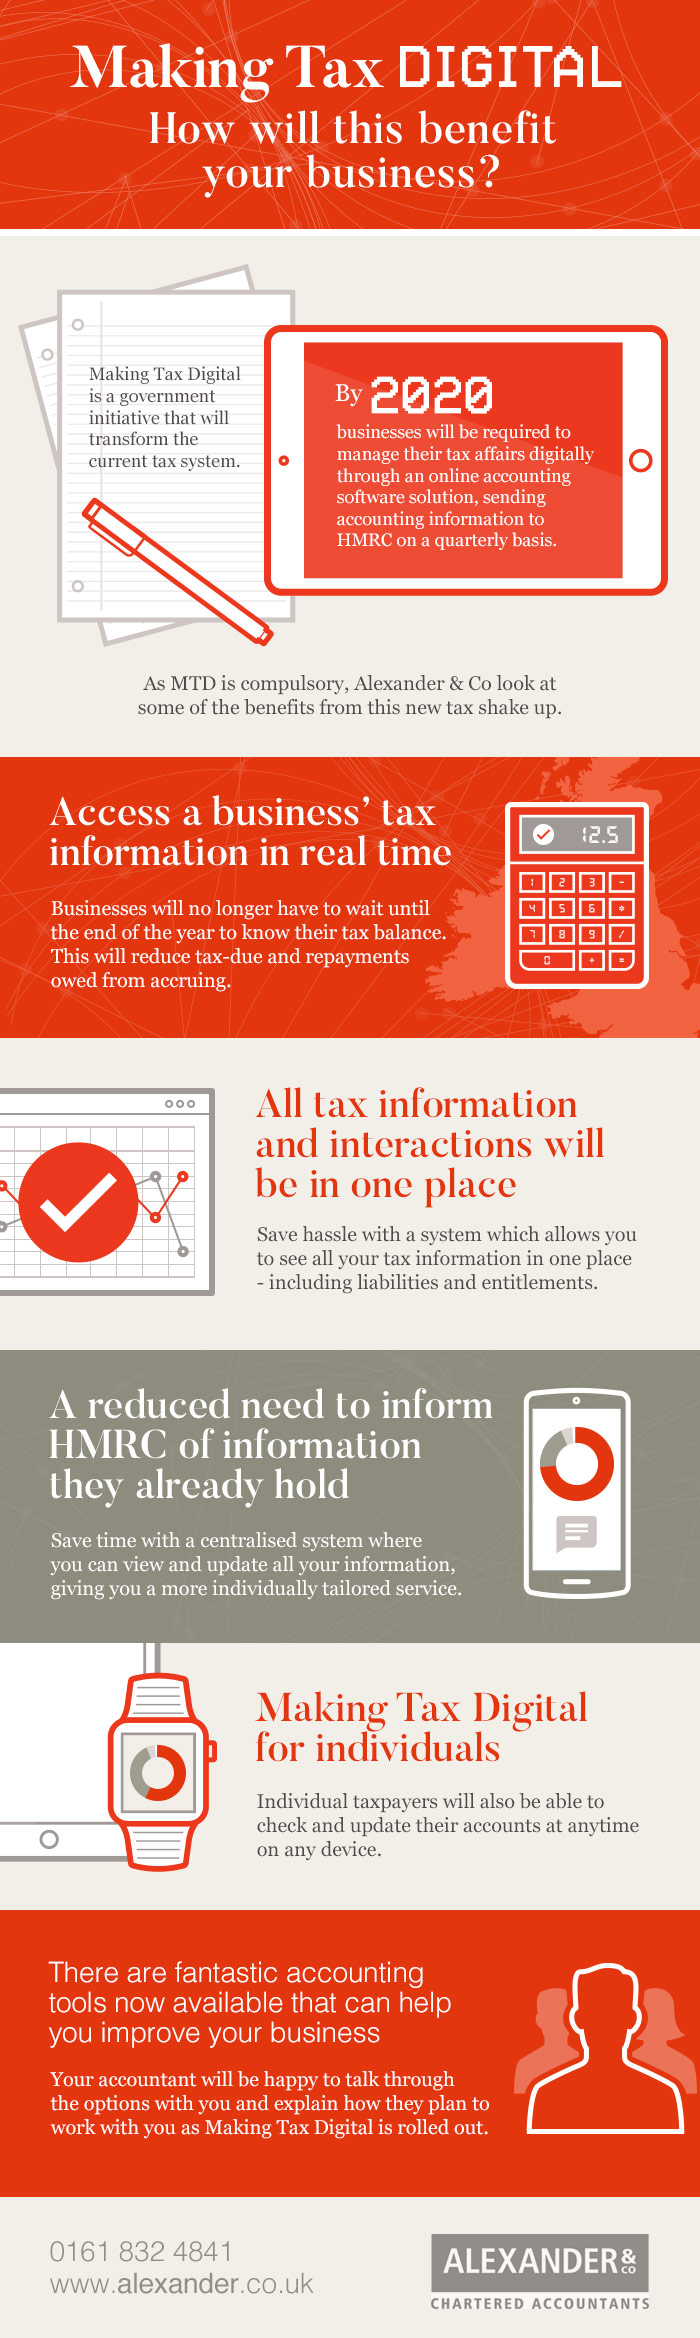 How to prepare your business for Making Tax Digital